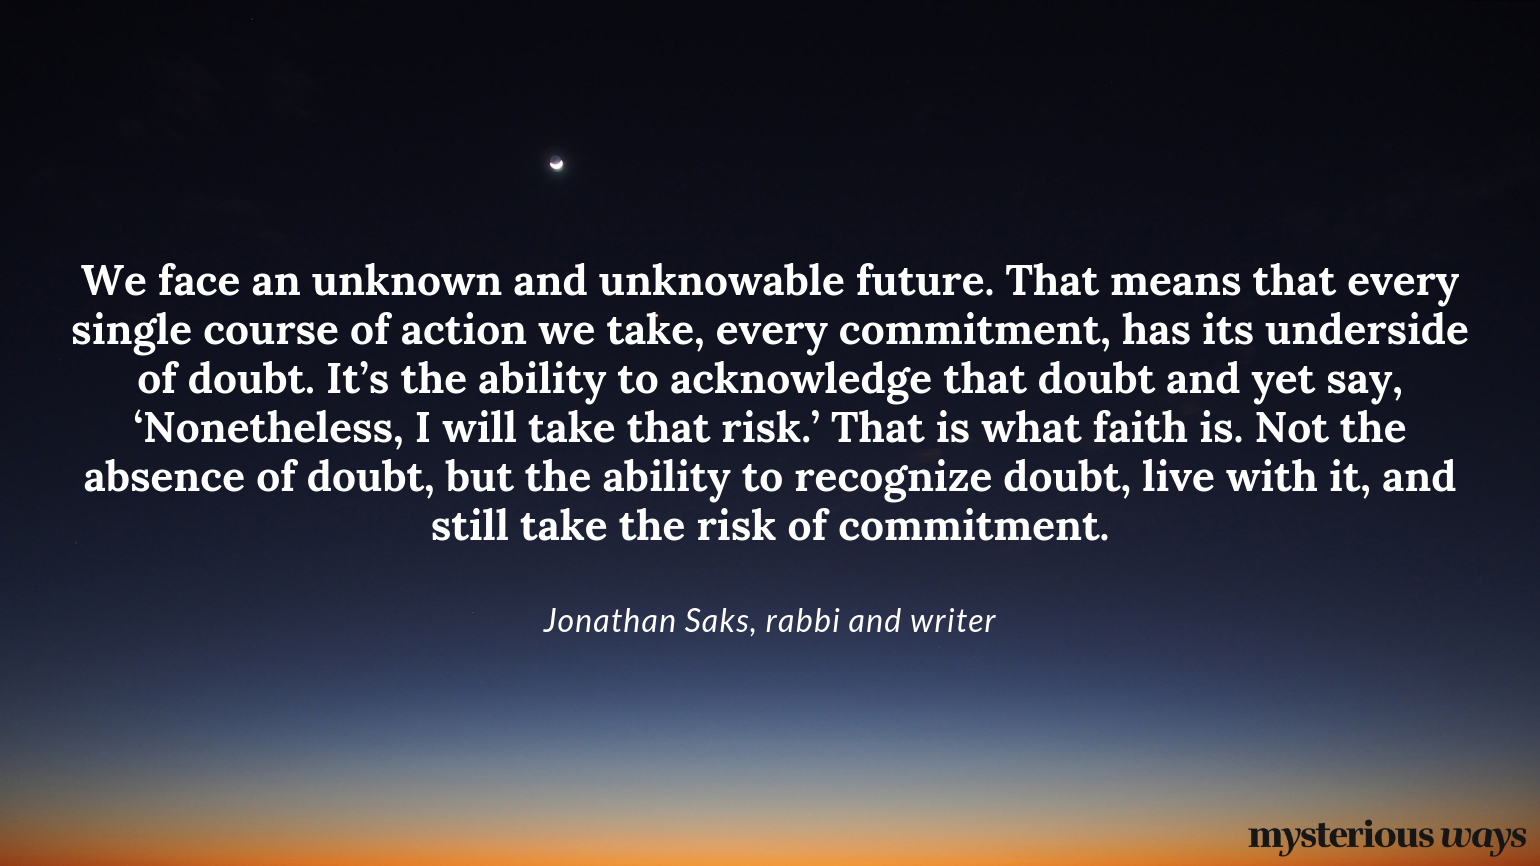 “We face an unknown and unknowable future.That means that every single course of action we take, every commitment, has its underside of doubt. It’s the ability to acknowledge that doubt and yet say, ‘Nonetheless, I will take that risk.’ That is what faith is. Not the absence of doubt, but the ability to recognize doubt, live with it, and still take the risk of commitment.”